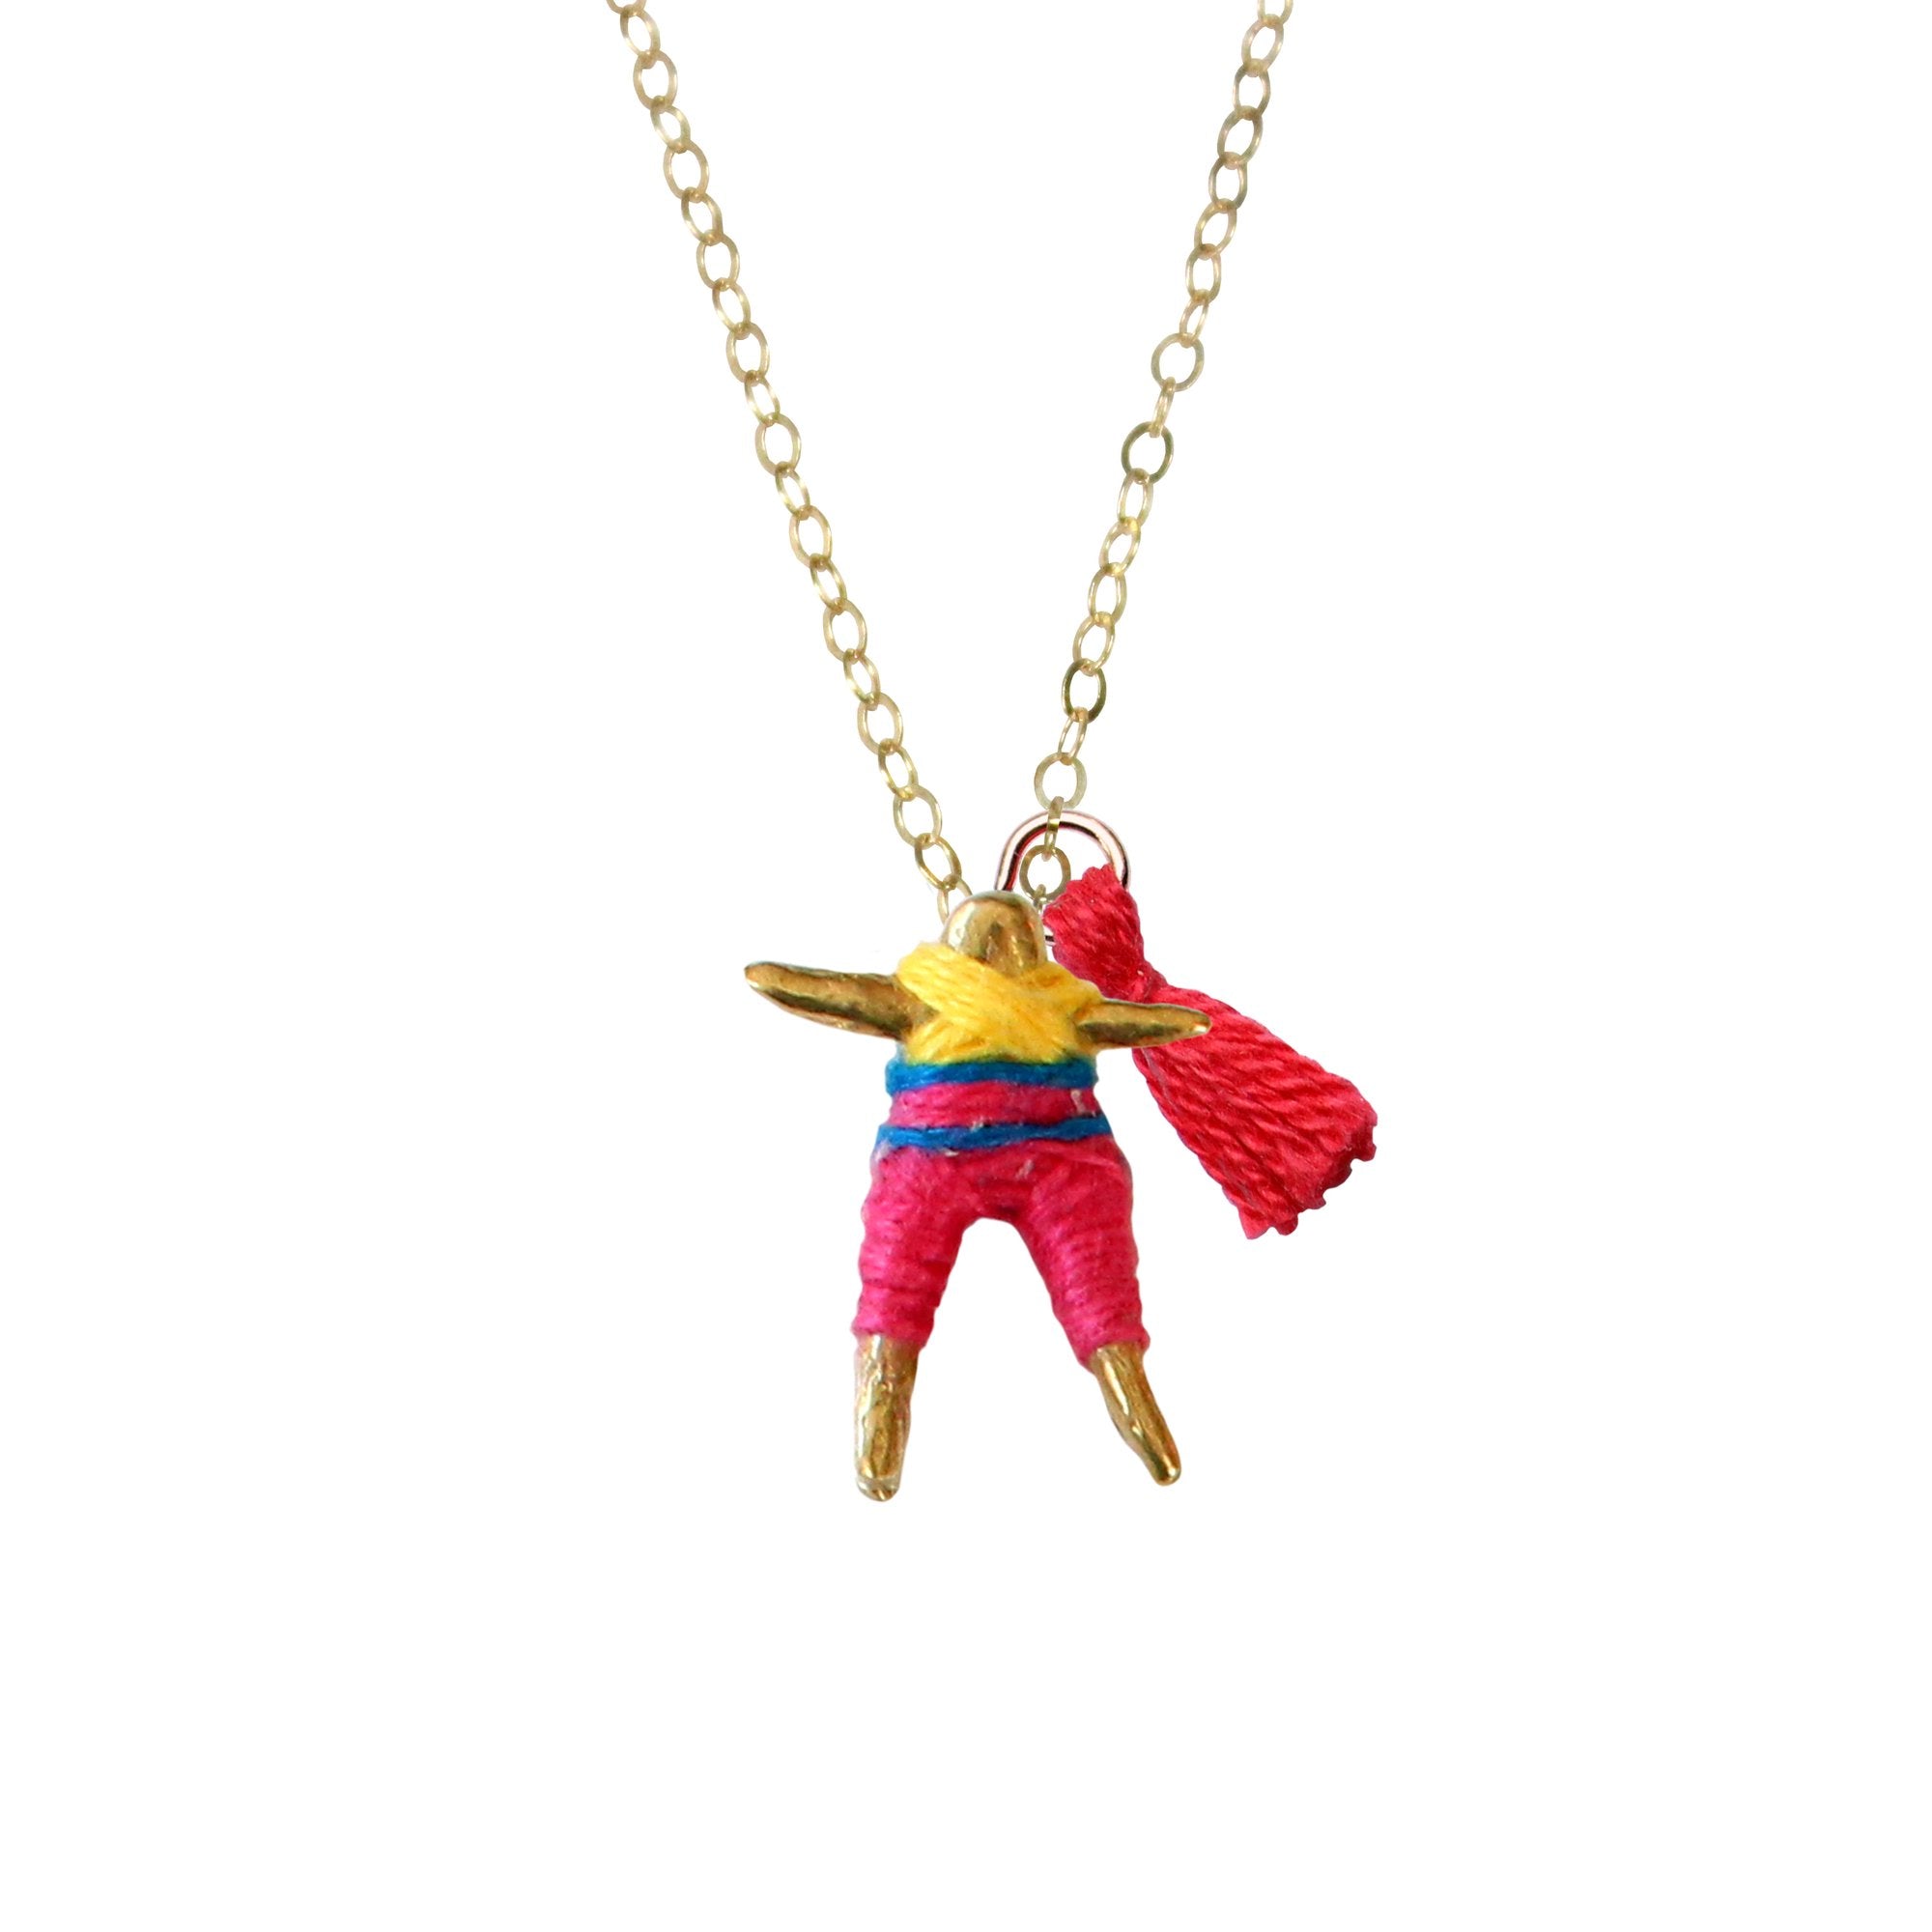 Worry Doll Necklace - Wanderlustre